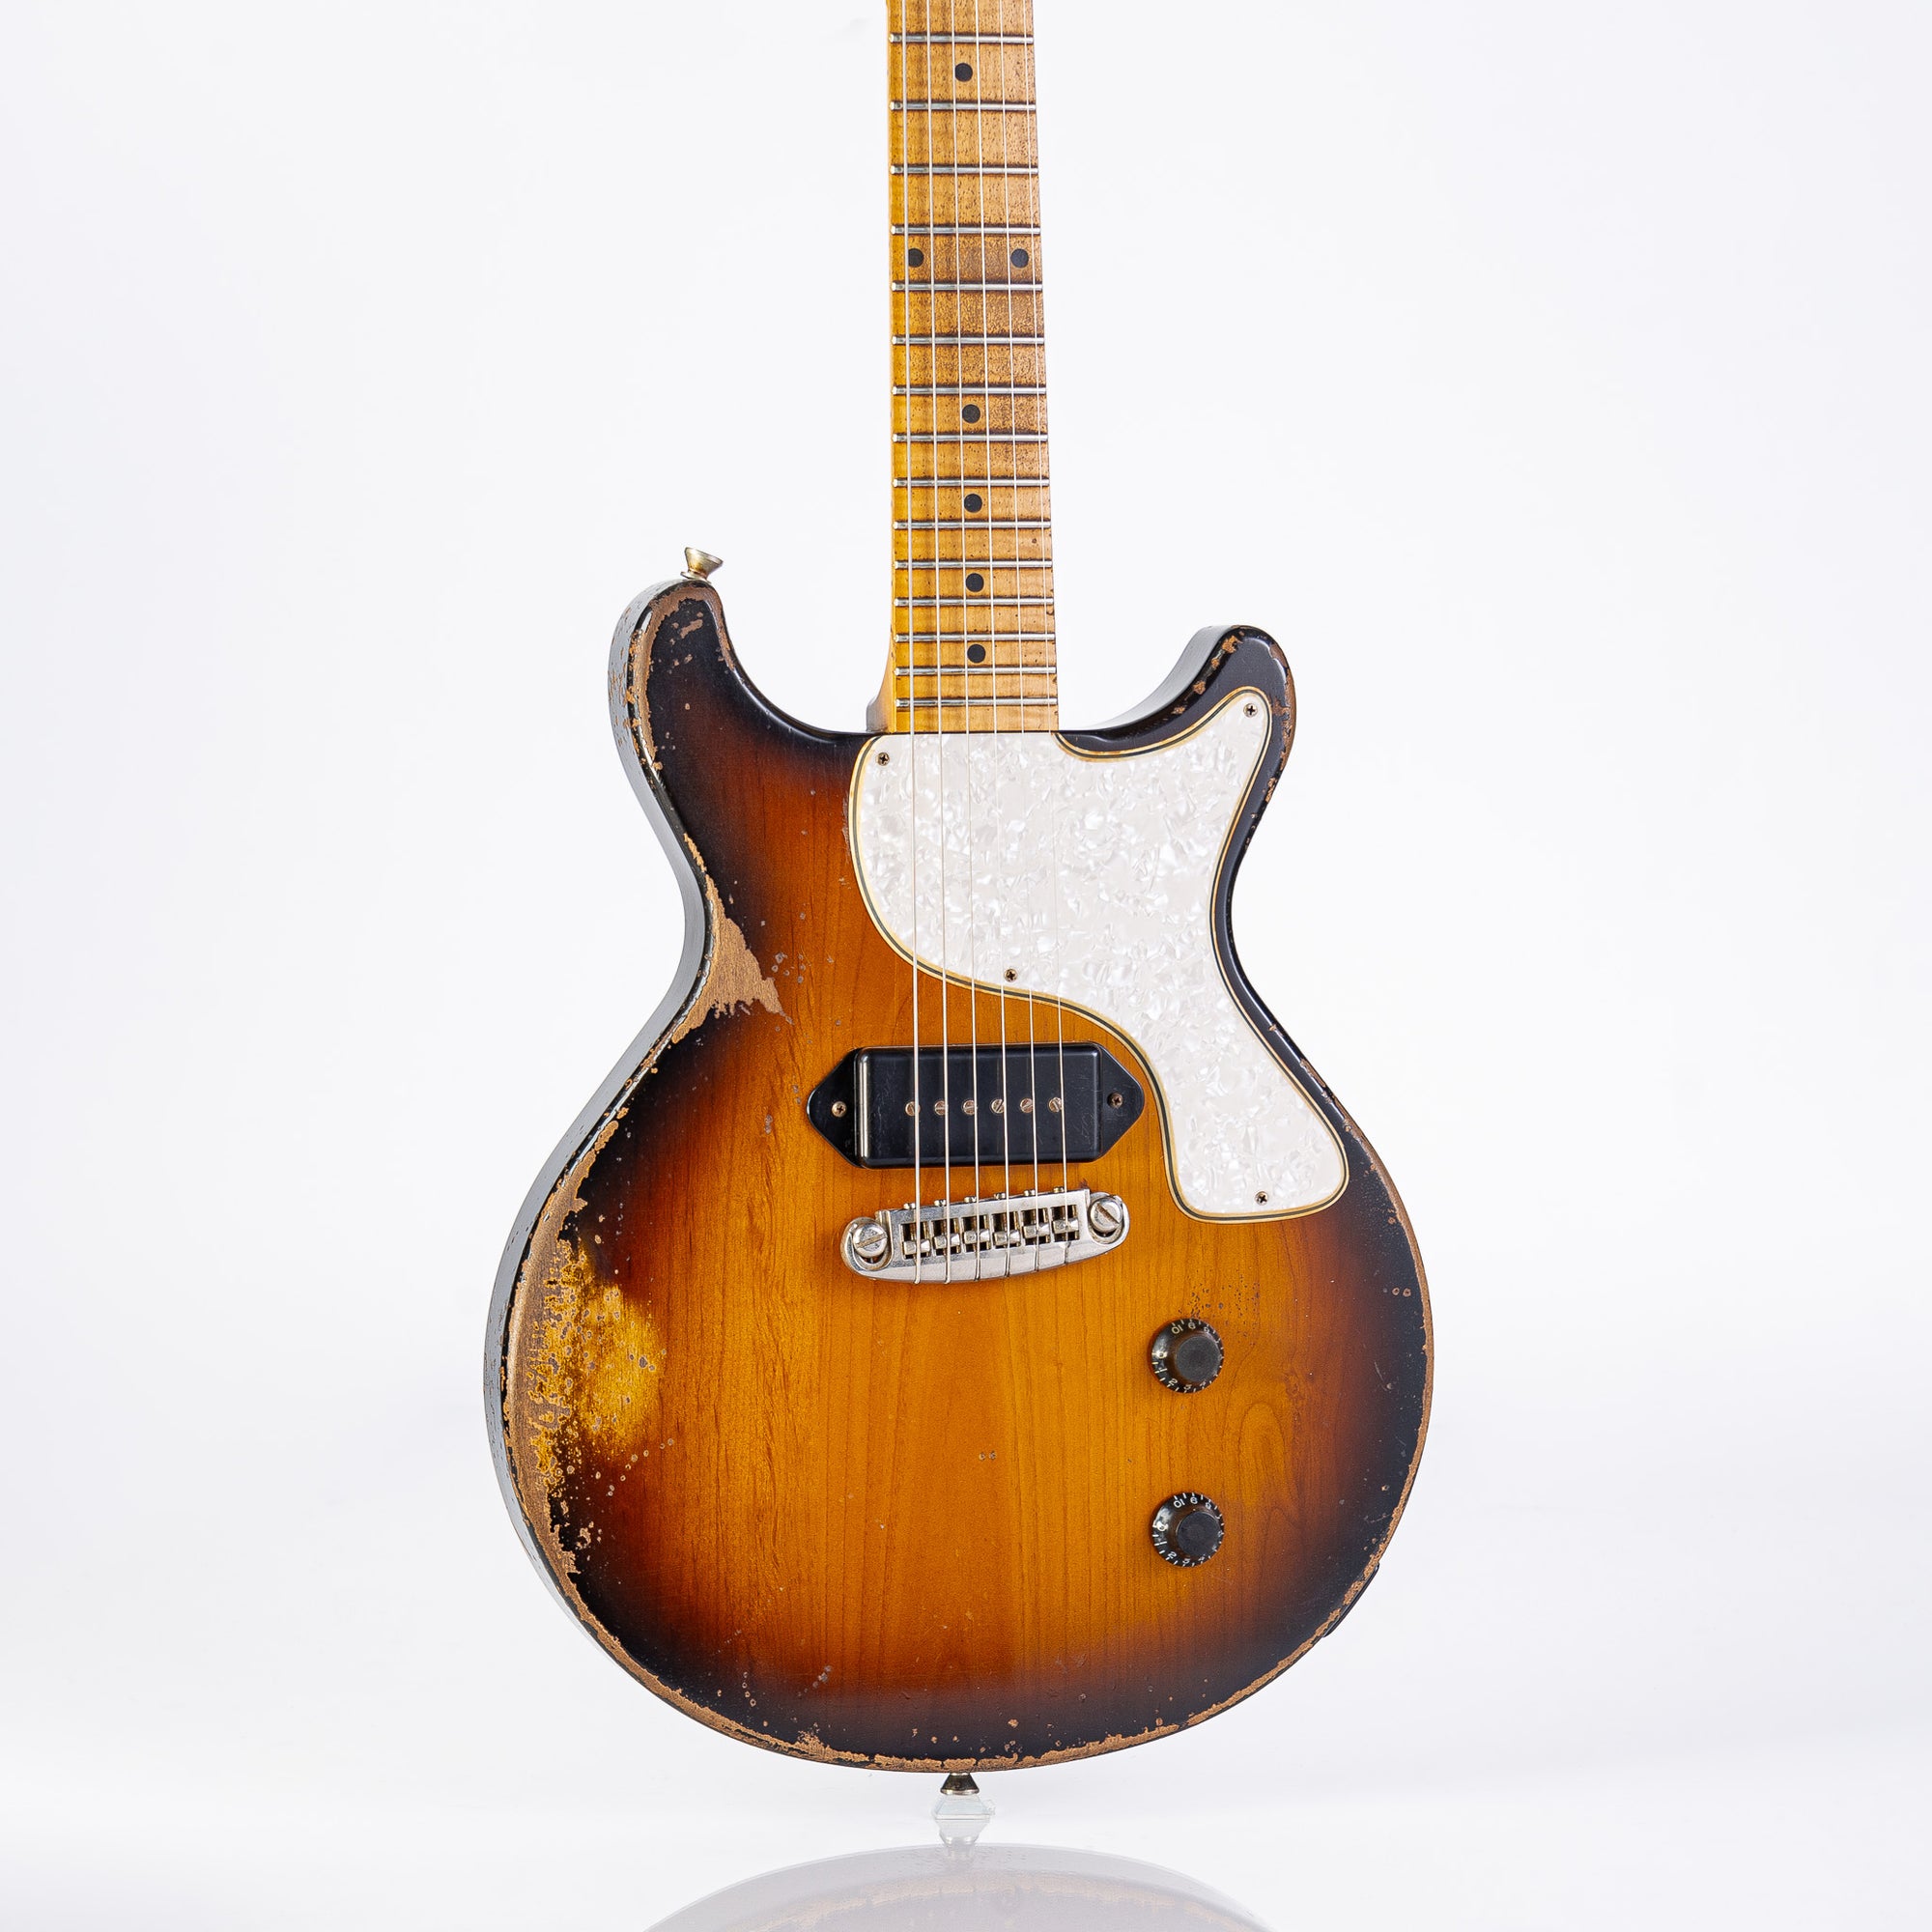 Rock N Roll Relics Thunders DC - Two Tone Burst